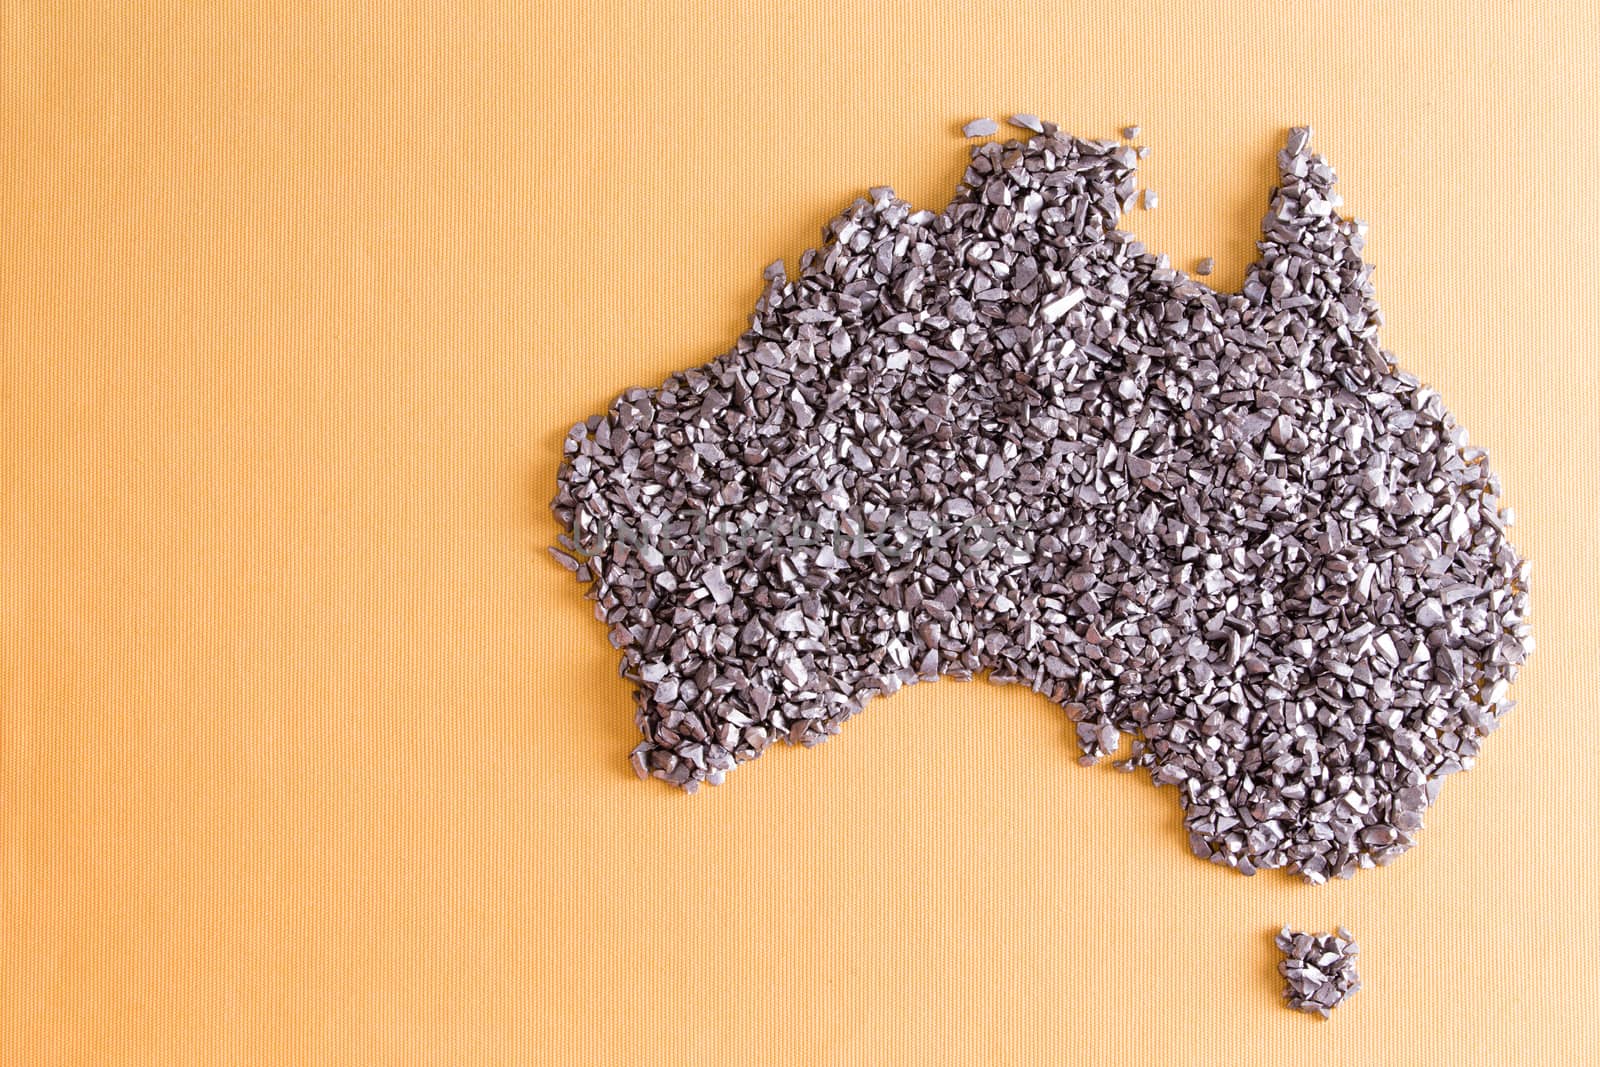 Conceptual map of Australia formed of small stones by coskun